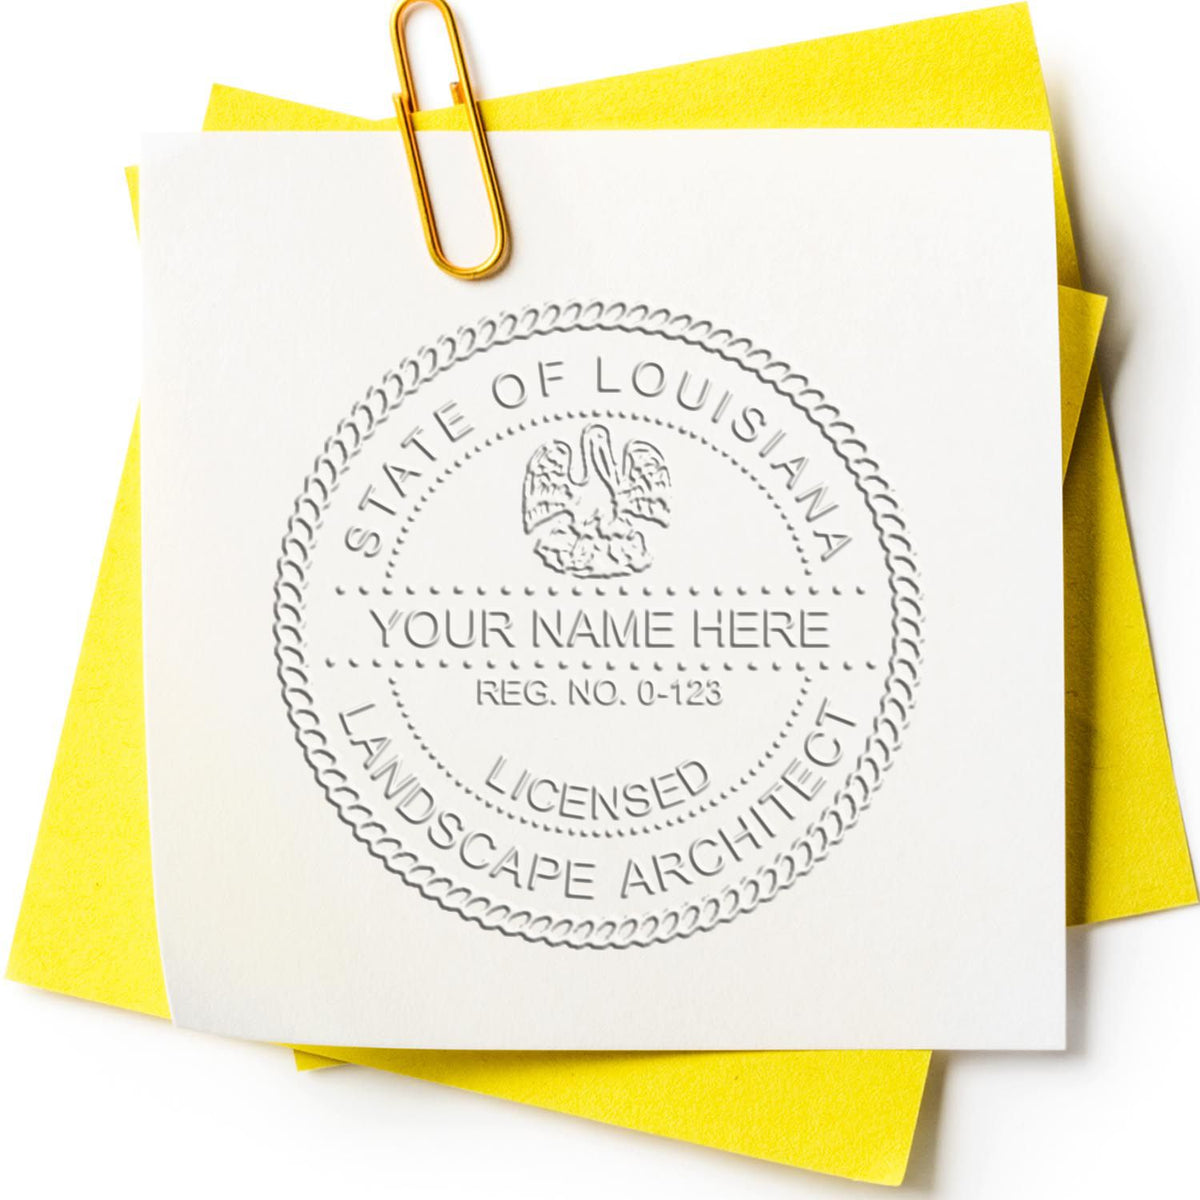 The Gift Louisiana Landscape Architect Seal stamp impression comes to life with a crisp, detailed image stamped on paper - showcasing true professional quality.